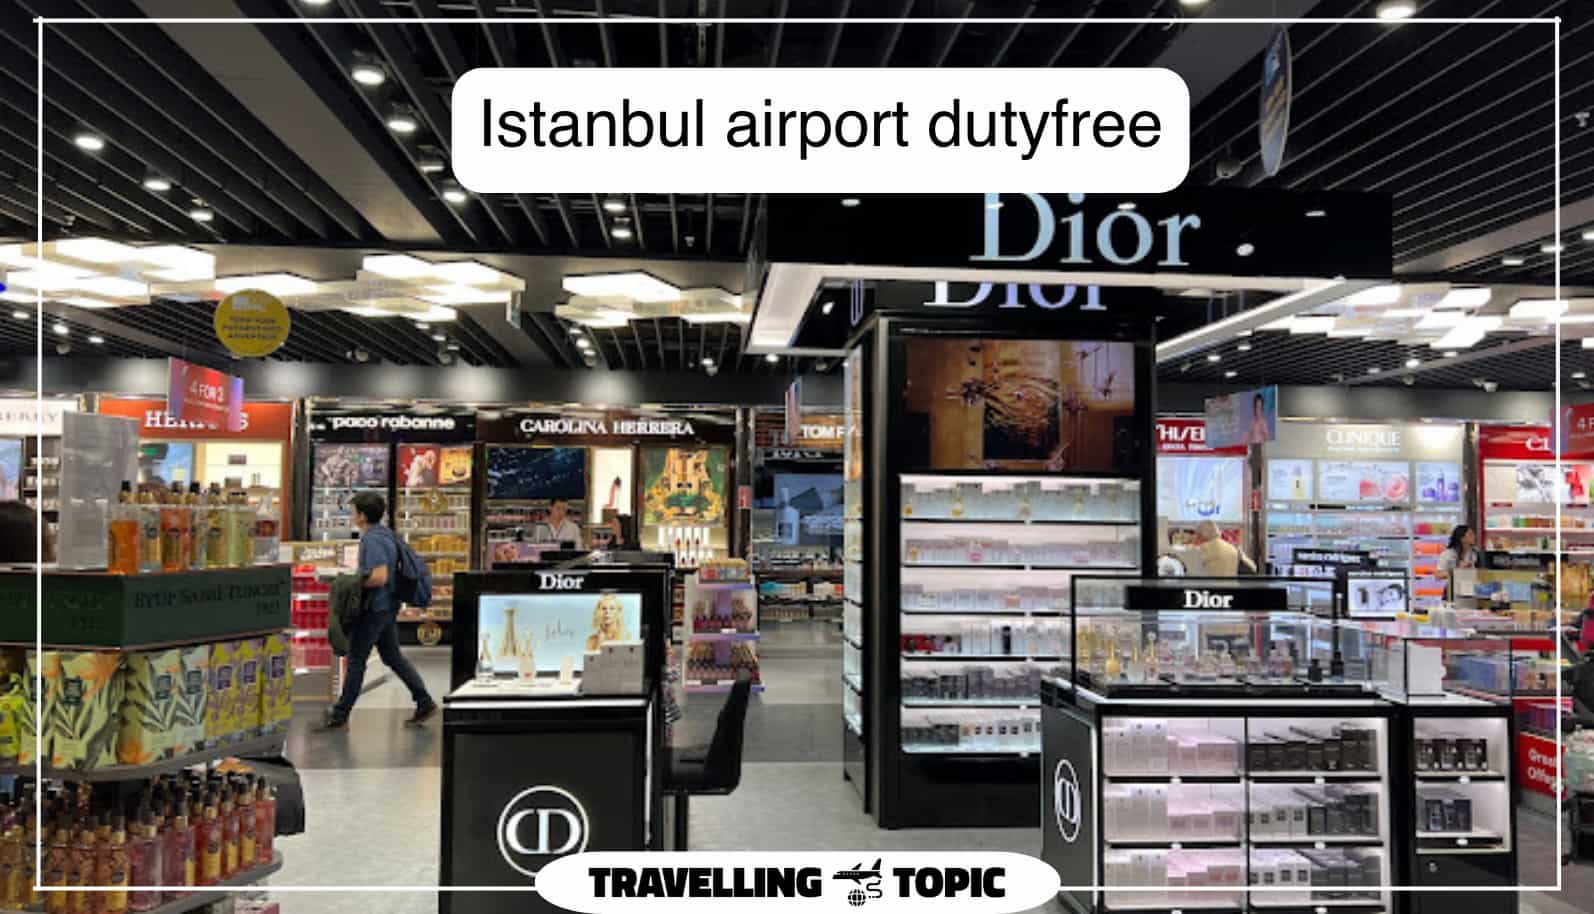 Istanbul airport duty free